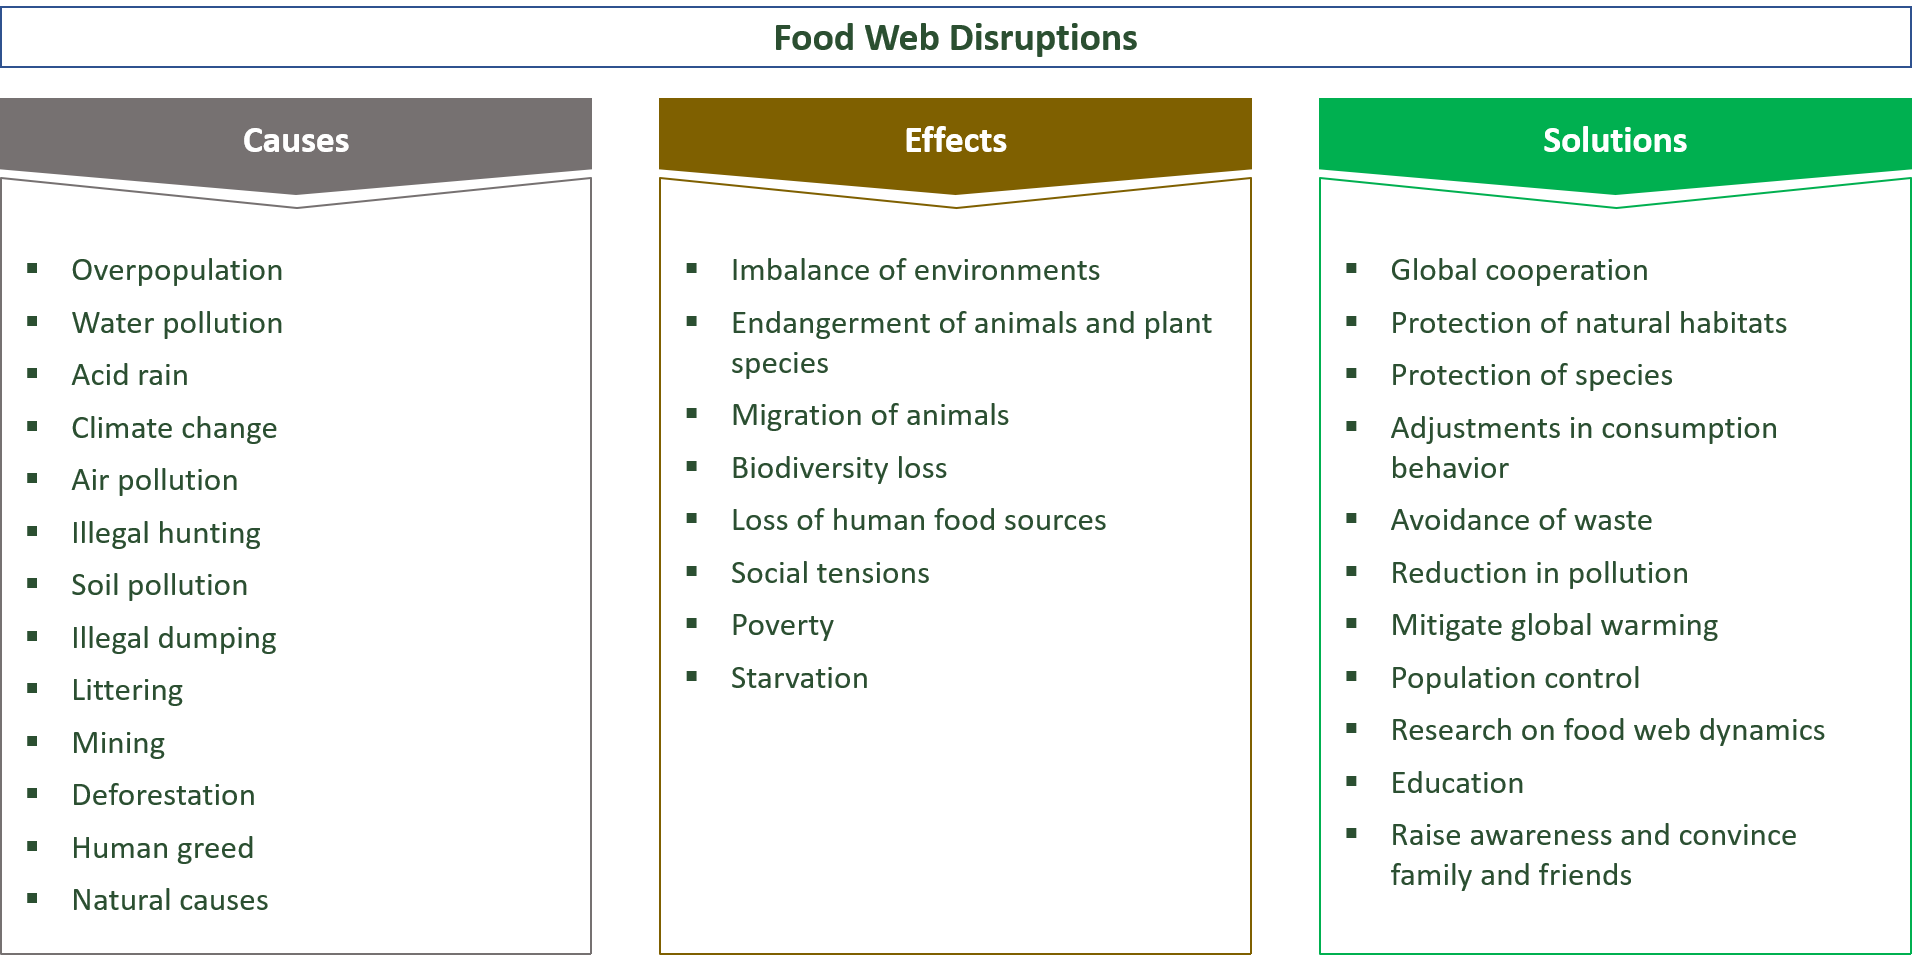 causes, effects, solutions for disruptions in the food web